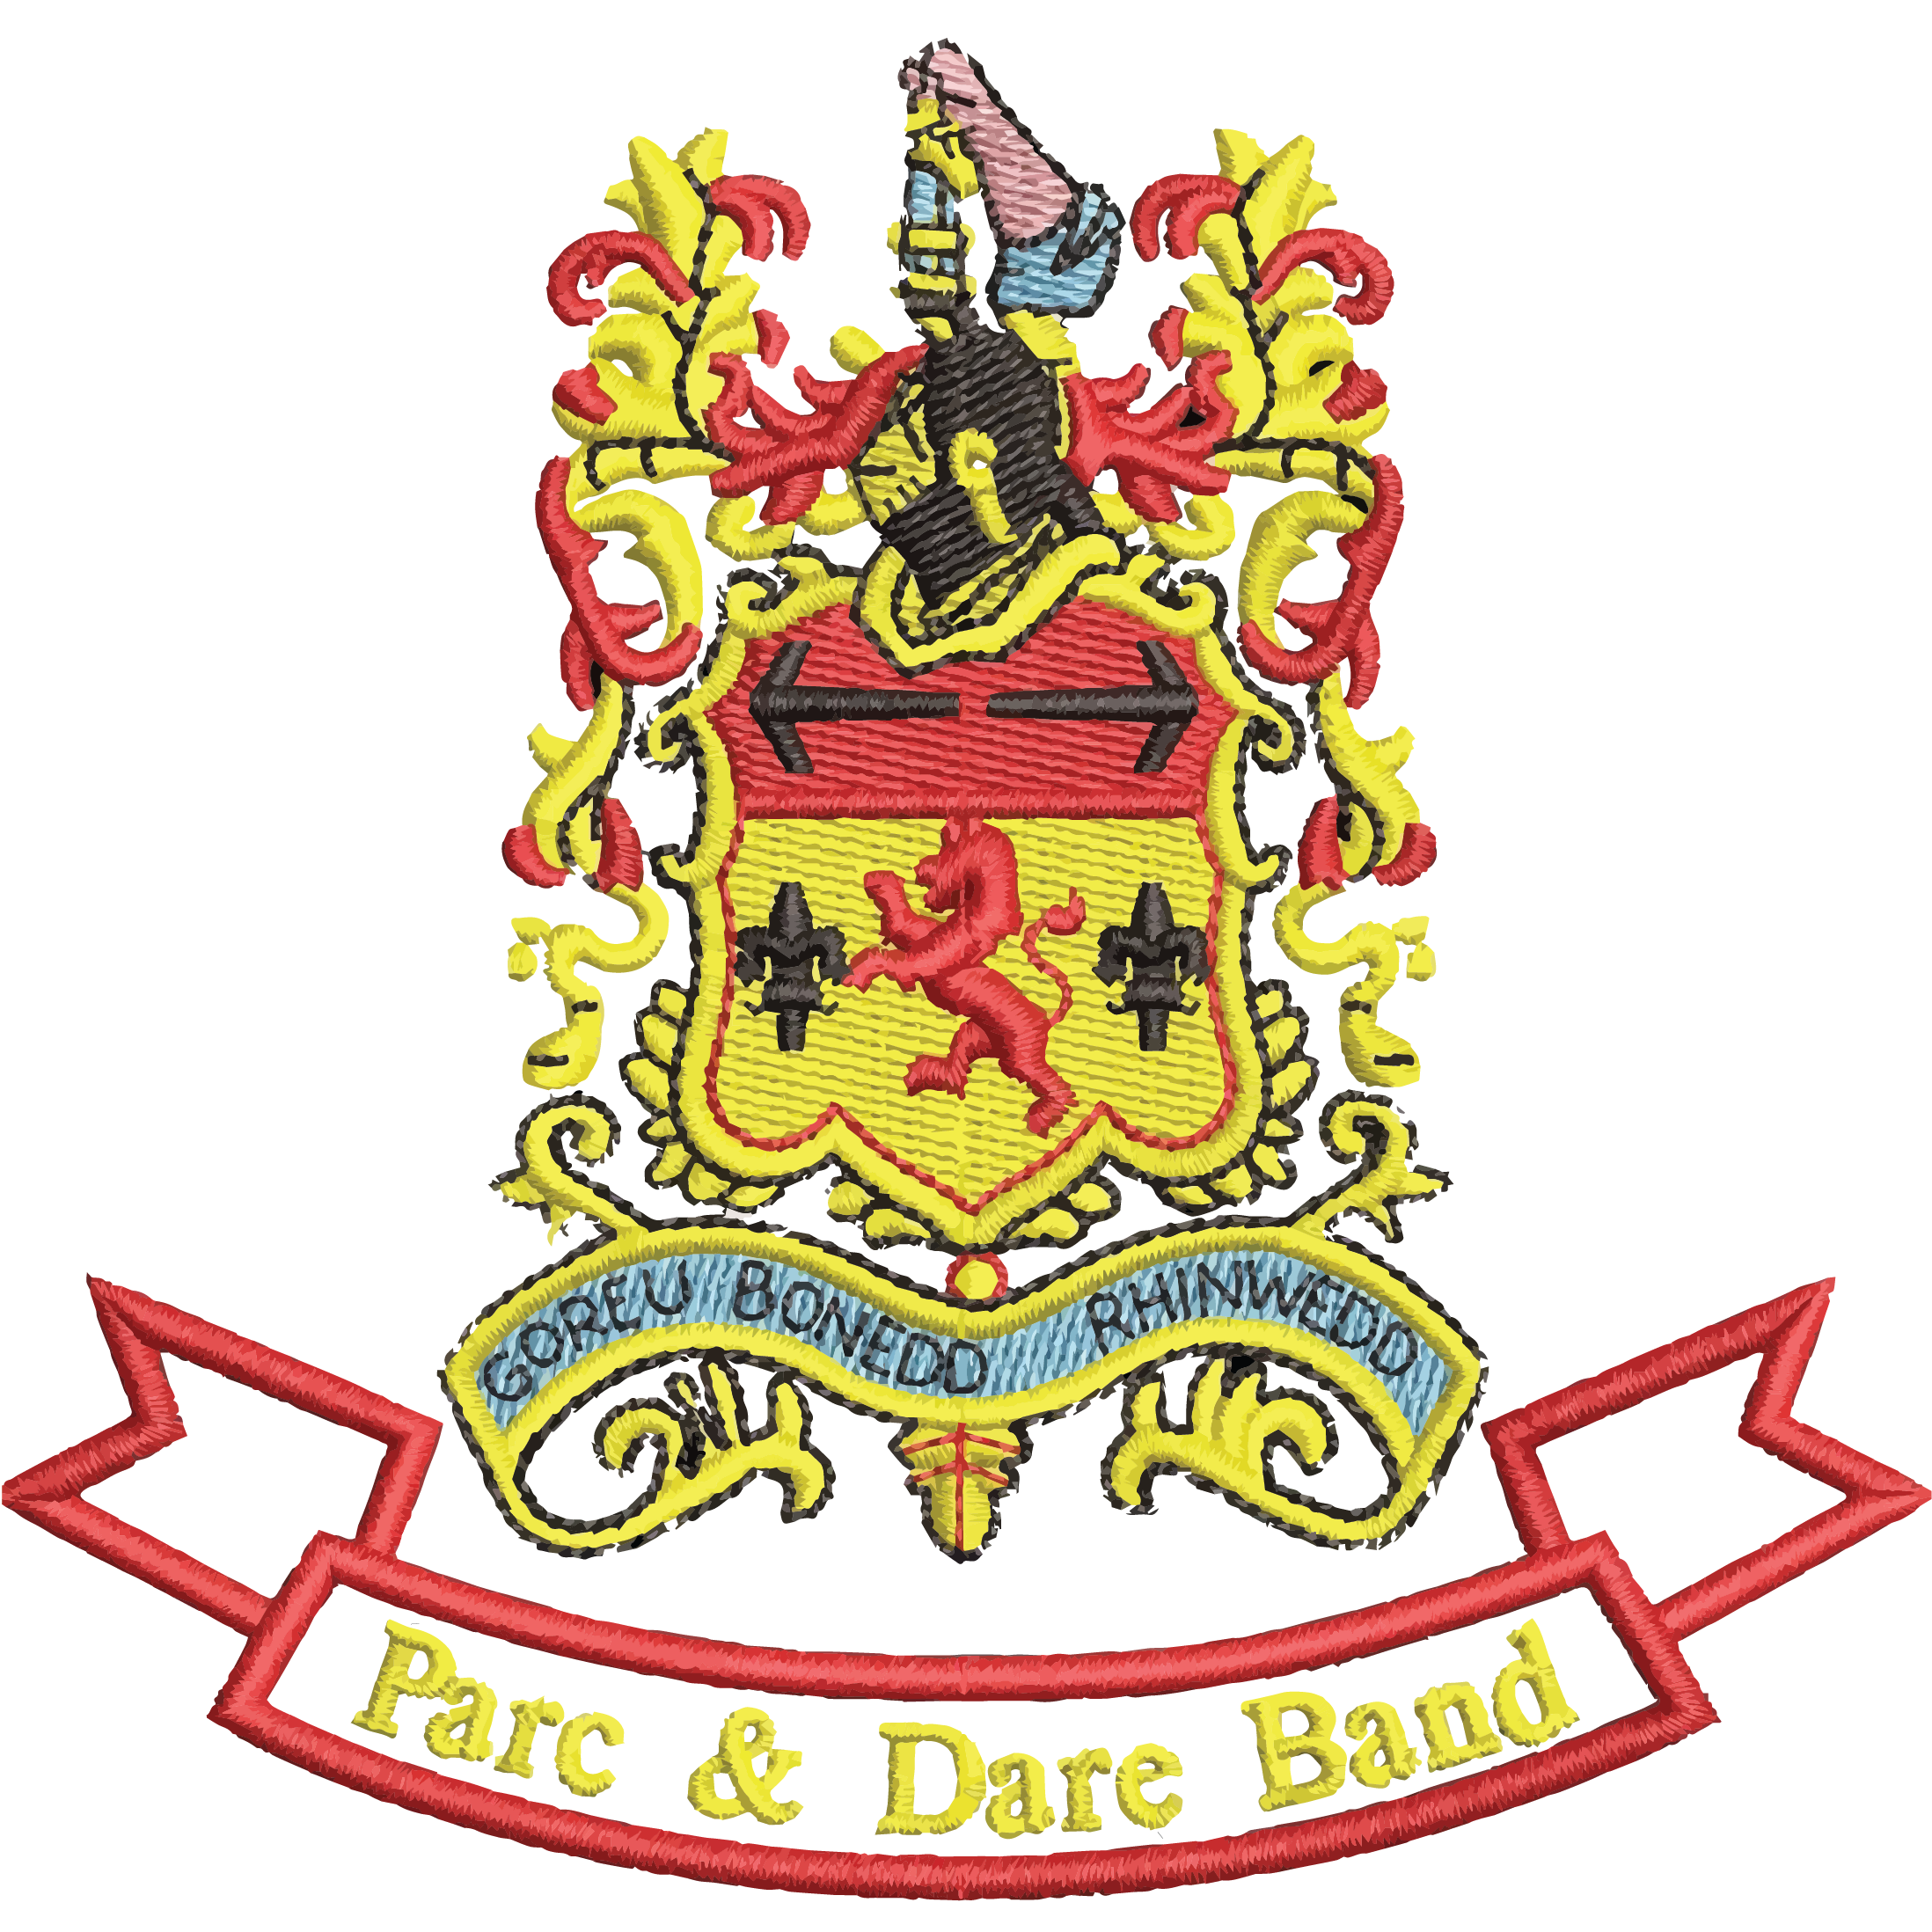 Parc & Dare Band